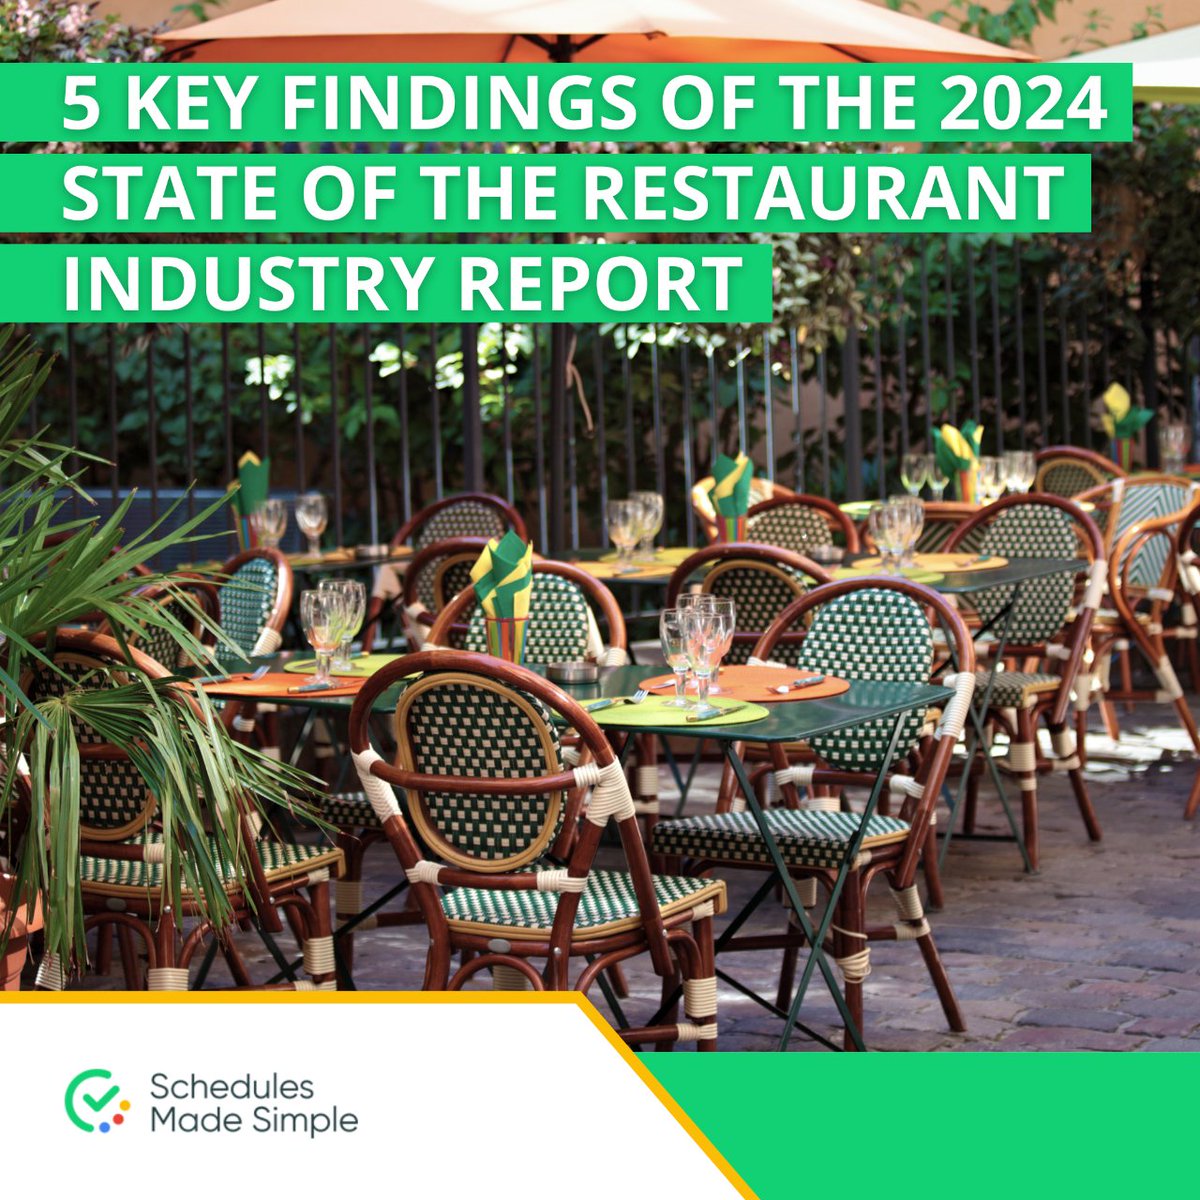 2024 is looking to be the most prosperous year yet for the restaurant industry!

Sales are set to soar, and thousands of new jobs are in the pipeline.

[Read more in the thread]

#RestaurantIndustry #Restaurant #RestaurantTrends #Chef #IndustryInsights #JobOpportunities